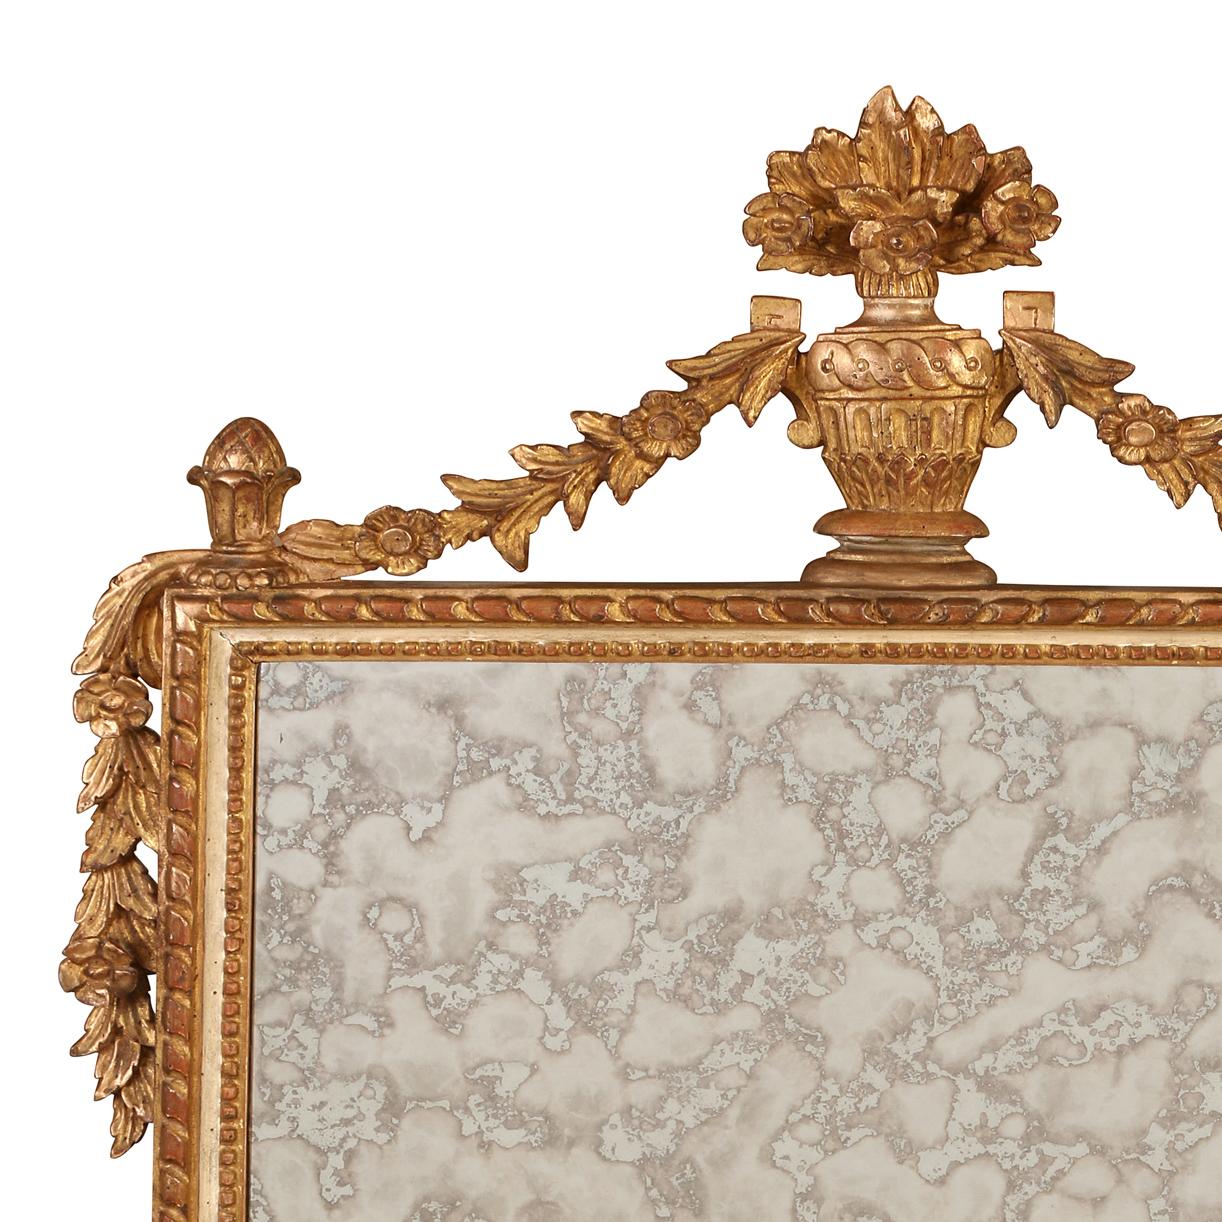 A neoclassical giltwood mirror with an urn and garlands at the crest, this mirror features a meticulously carved frame that exudes sophistication. The gilded finish adds a touch of regality and opulence to the piece, reflecting the grandeur